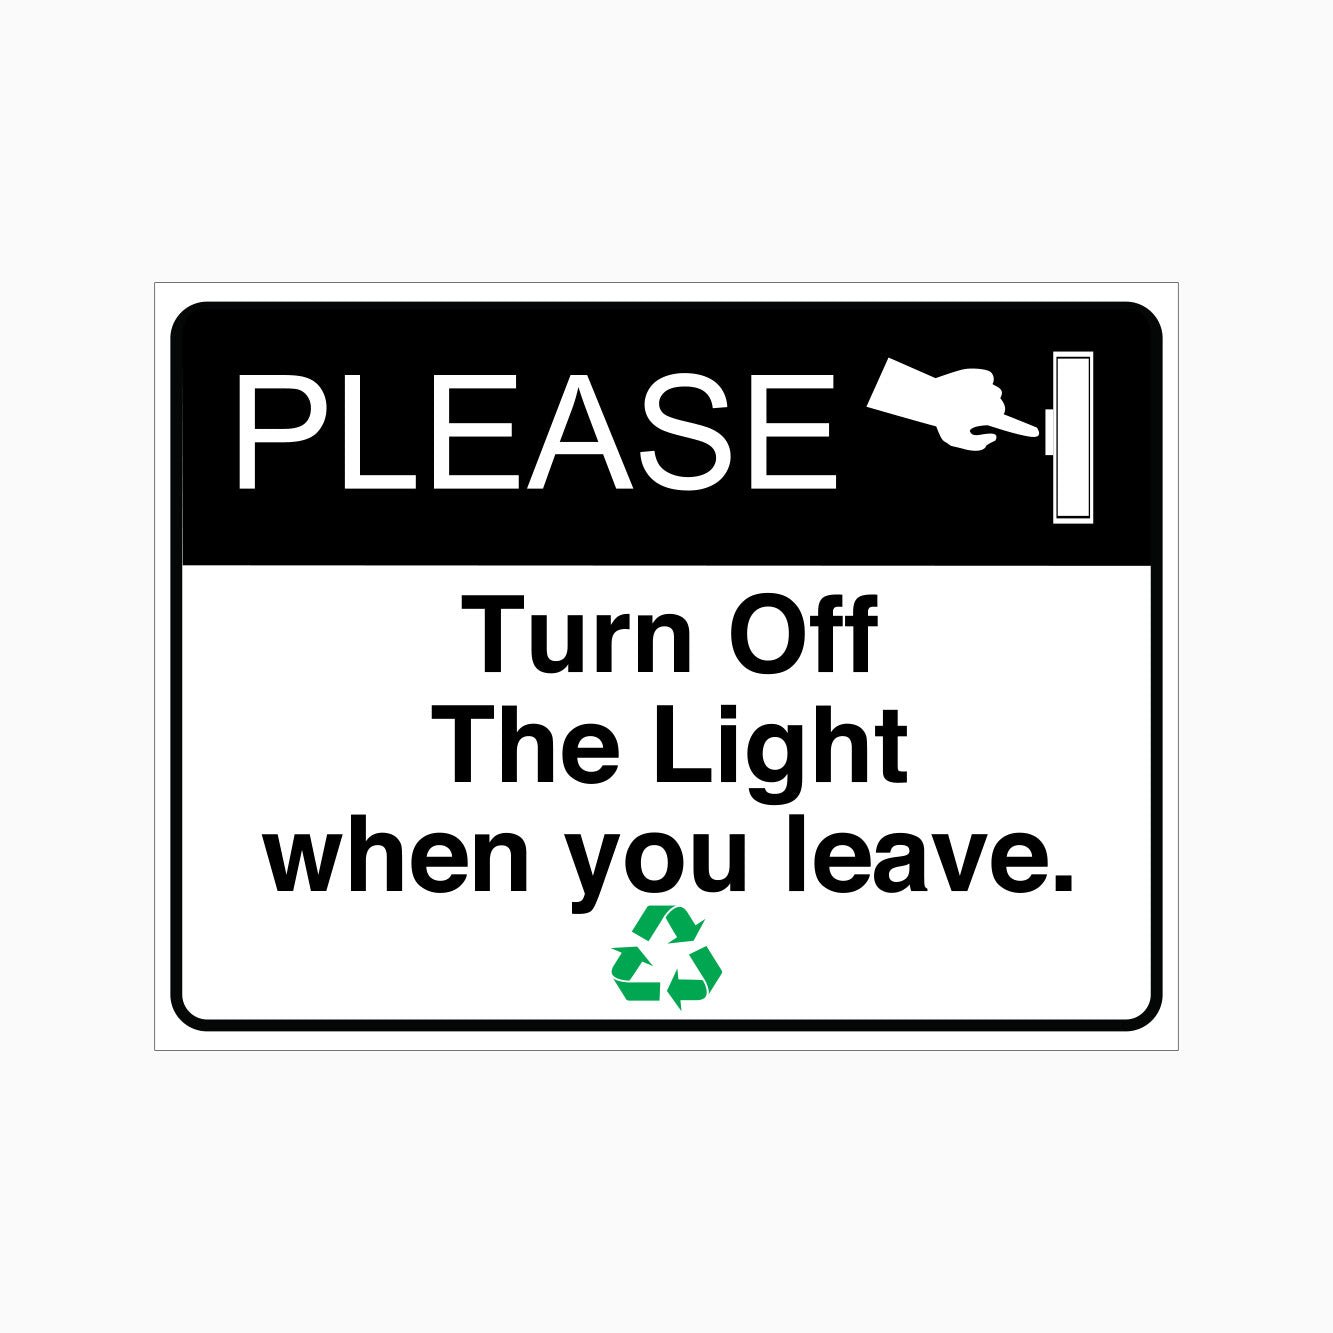 PLEAES TURN OFF THE LIGHT WHEN YOU LEAVE SIGN